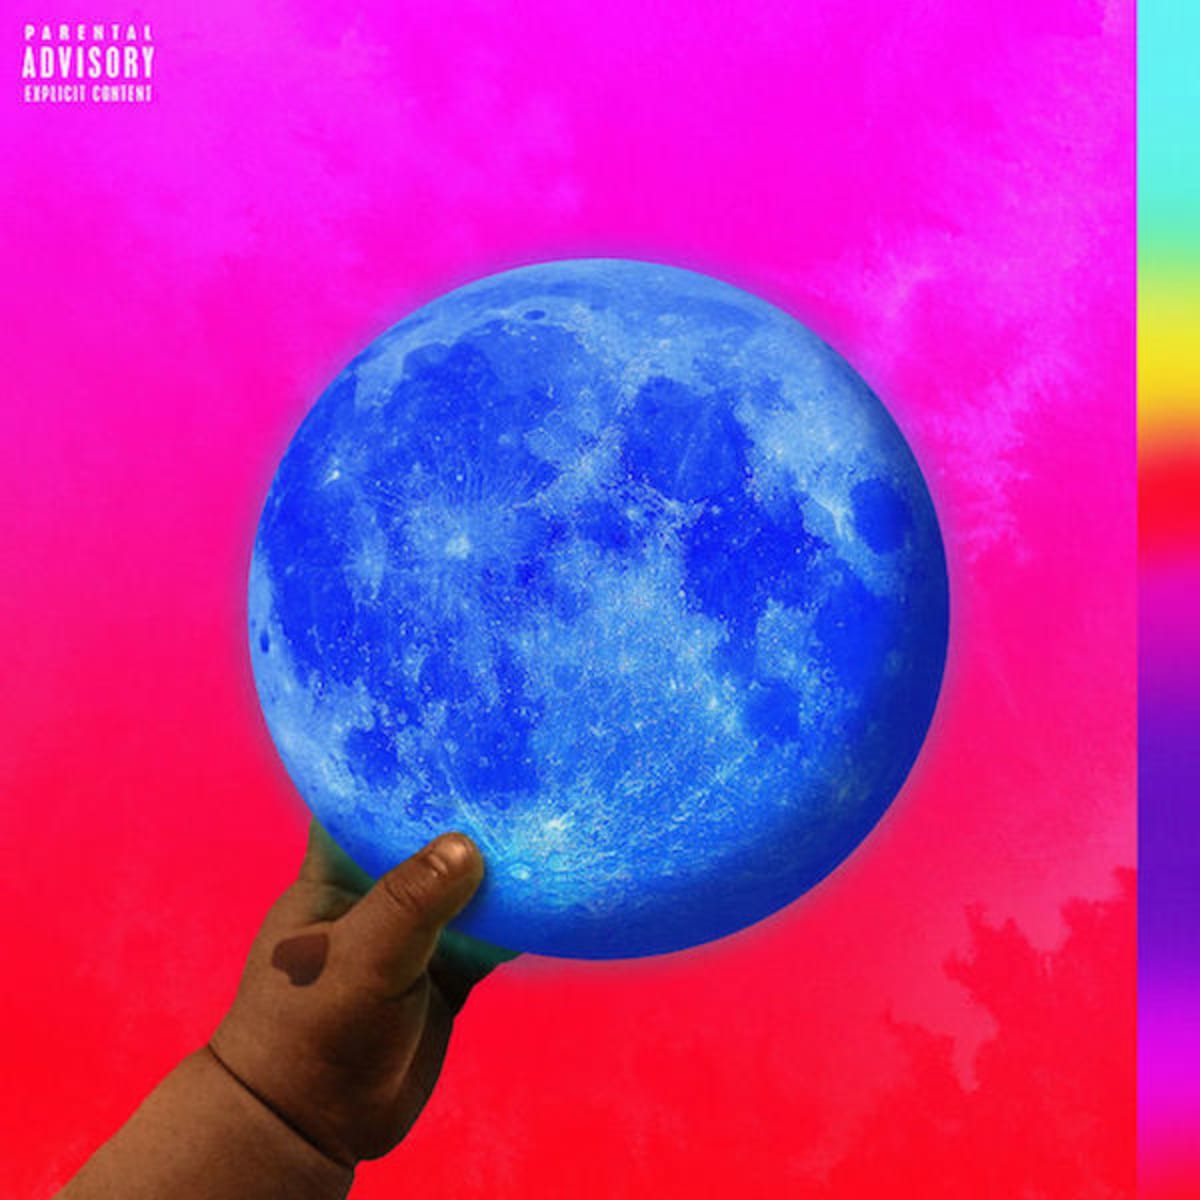 Wale's New Album, Shine, Is Here Complex